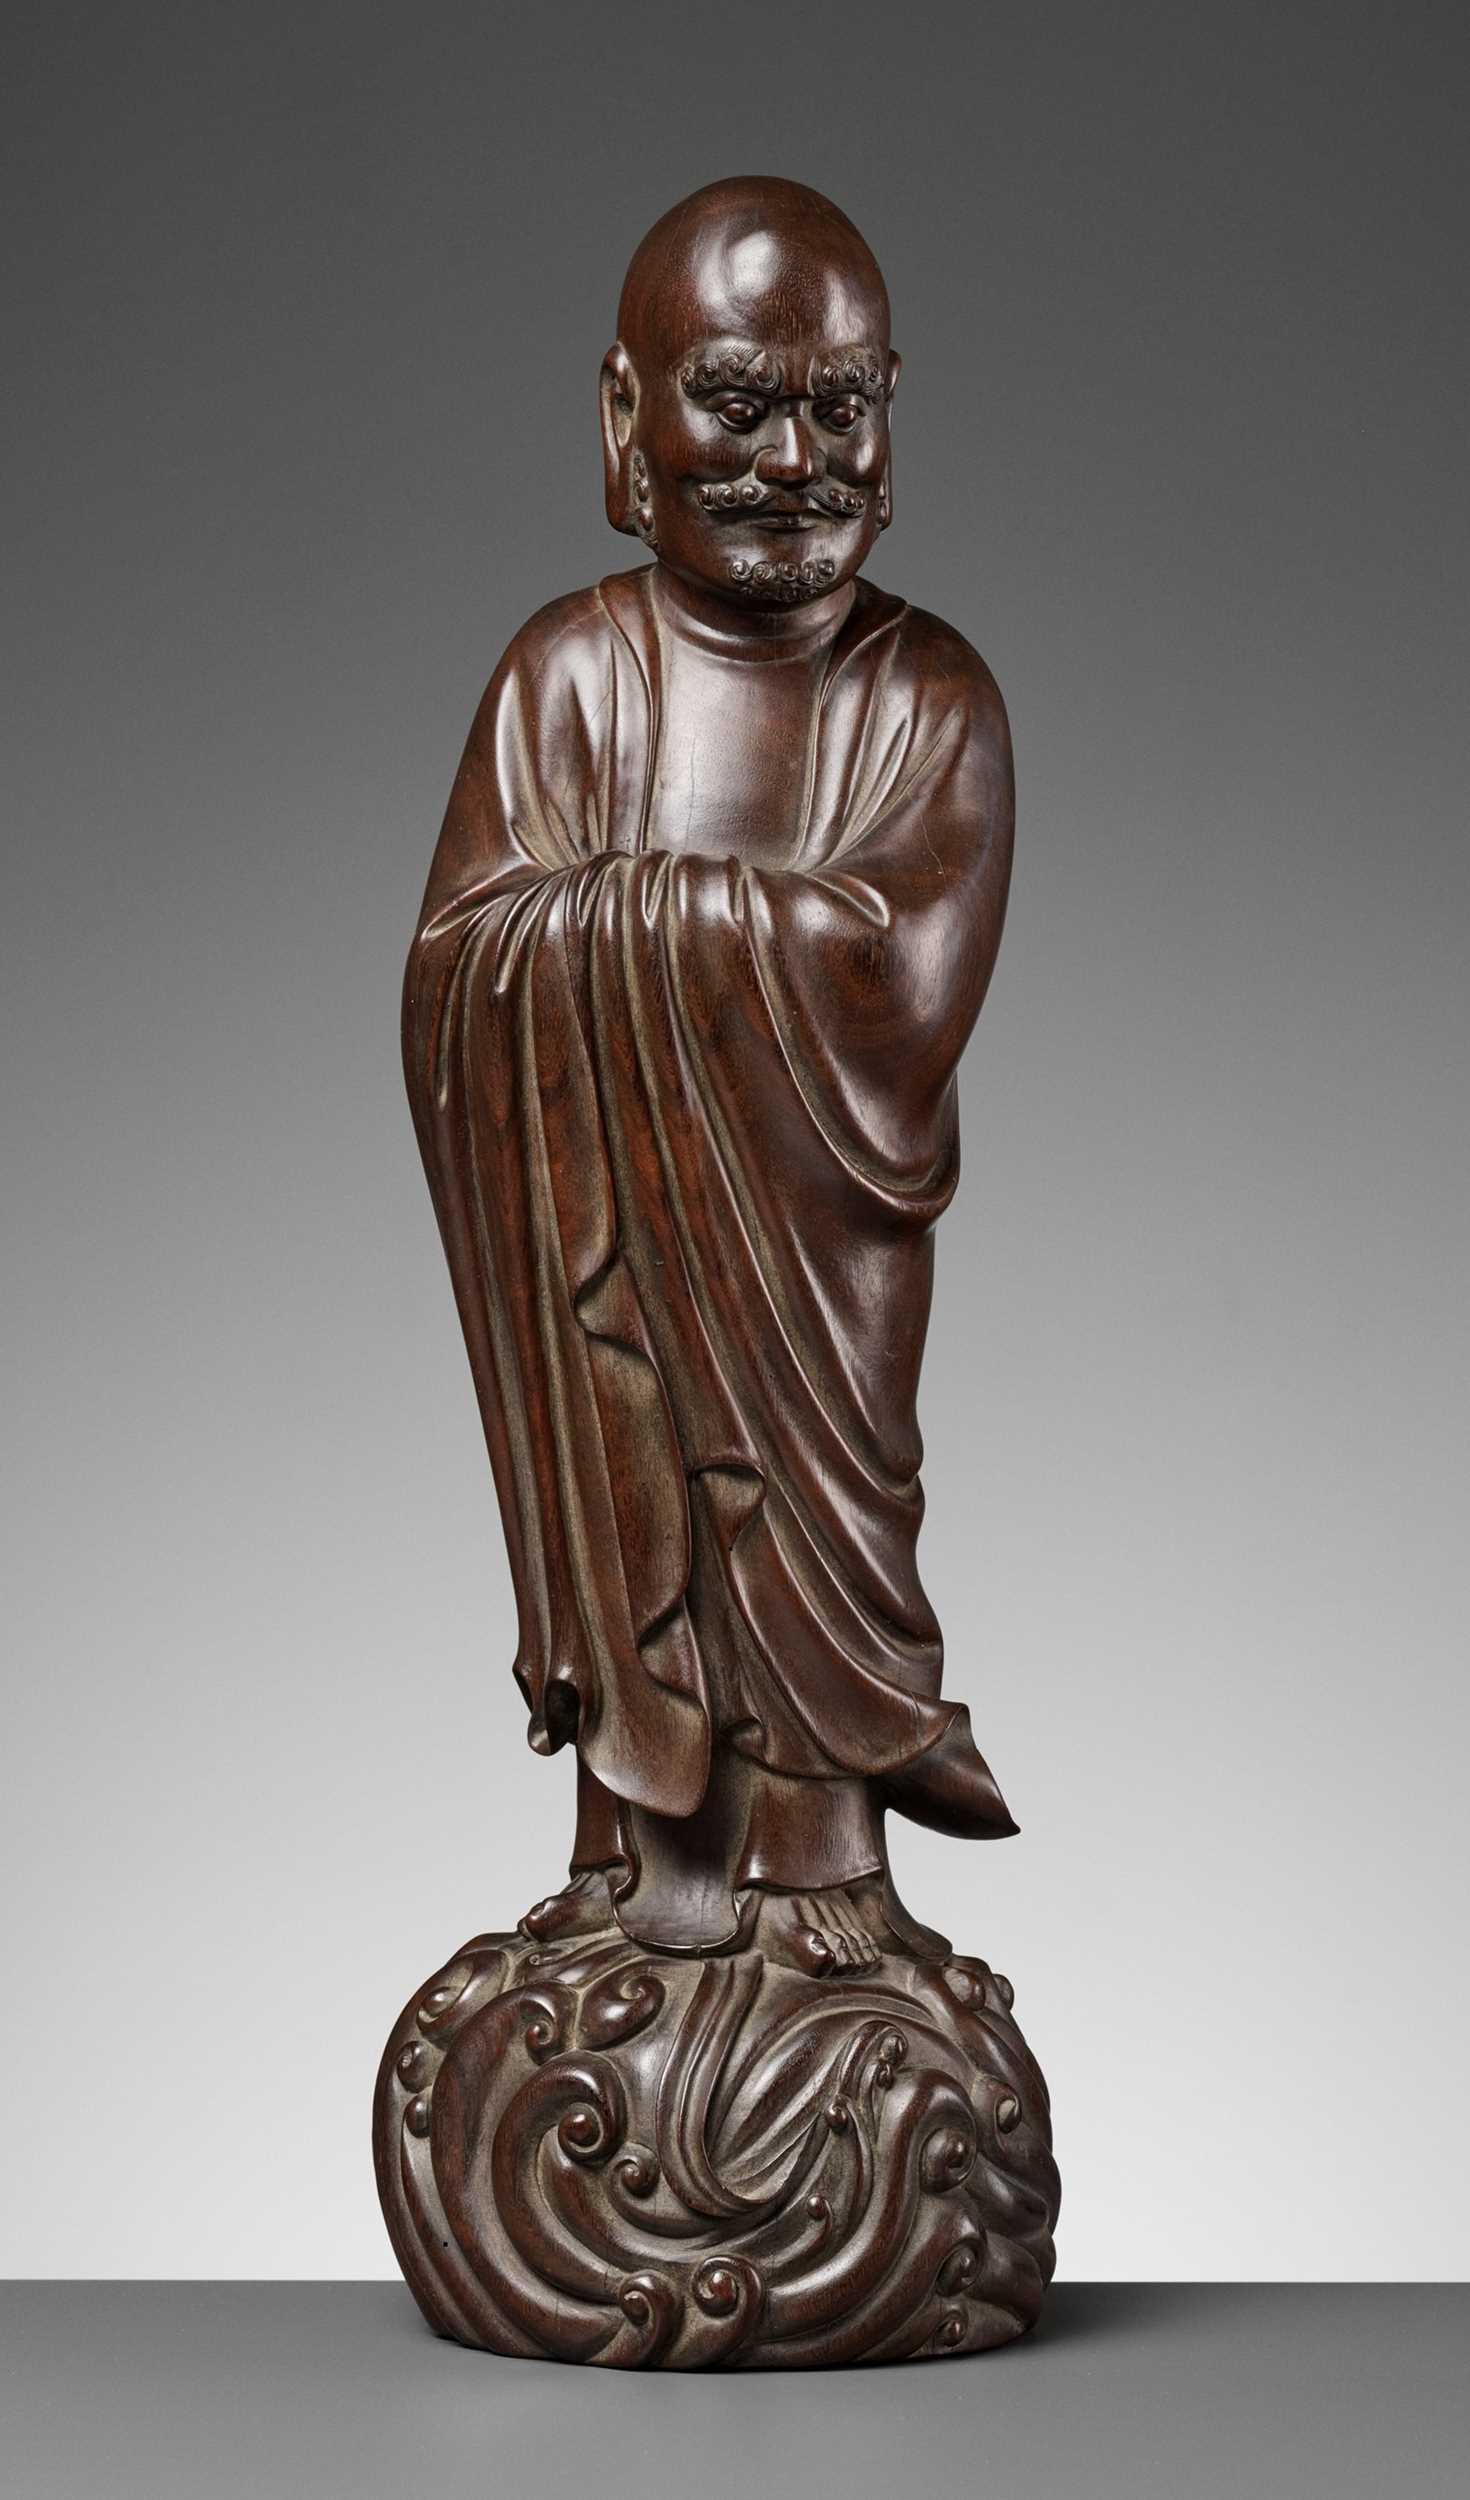 Lot 96 - A LARGE HARDWOOD FIGURE OF DAMO (BODHIDHARMA), LATE MING TO EARLY QING DYNASTY